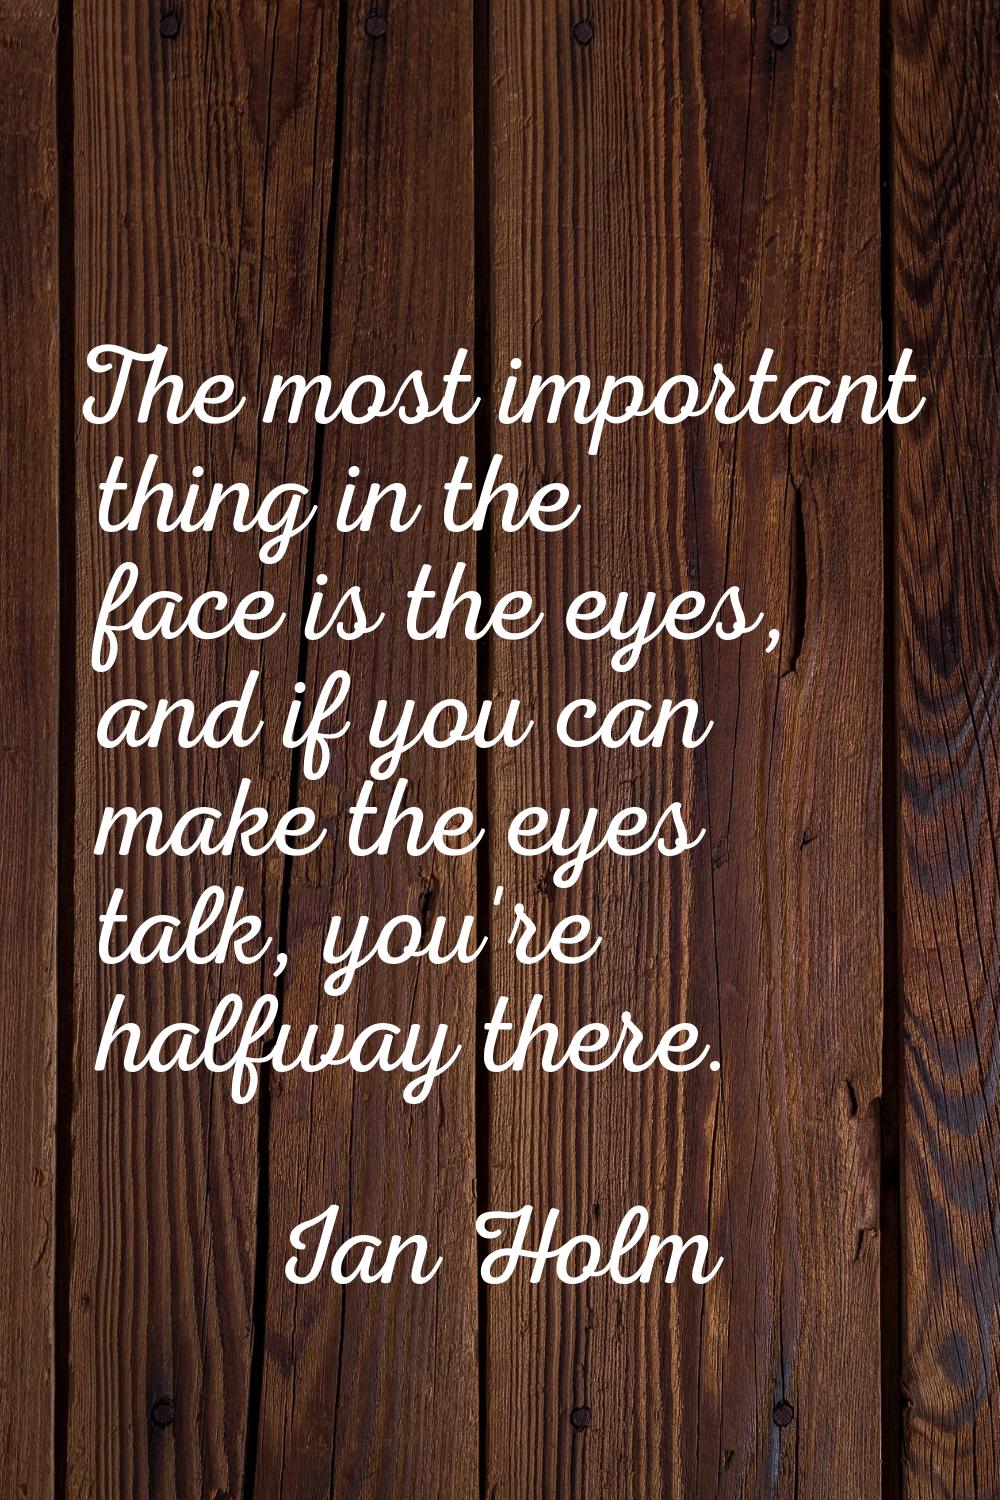 The most important thing in the face is the eyes, and if you can make the eyes talk, you're halfway